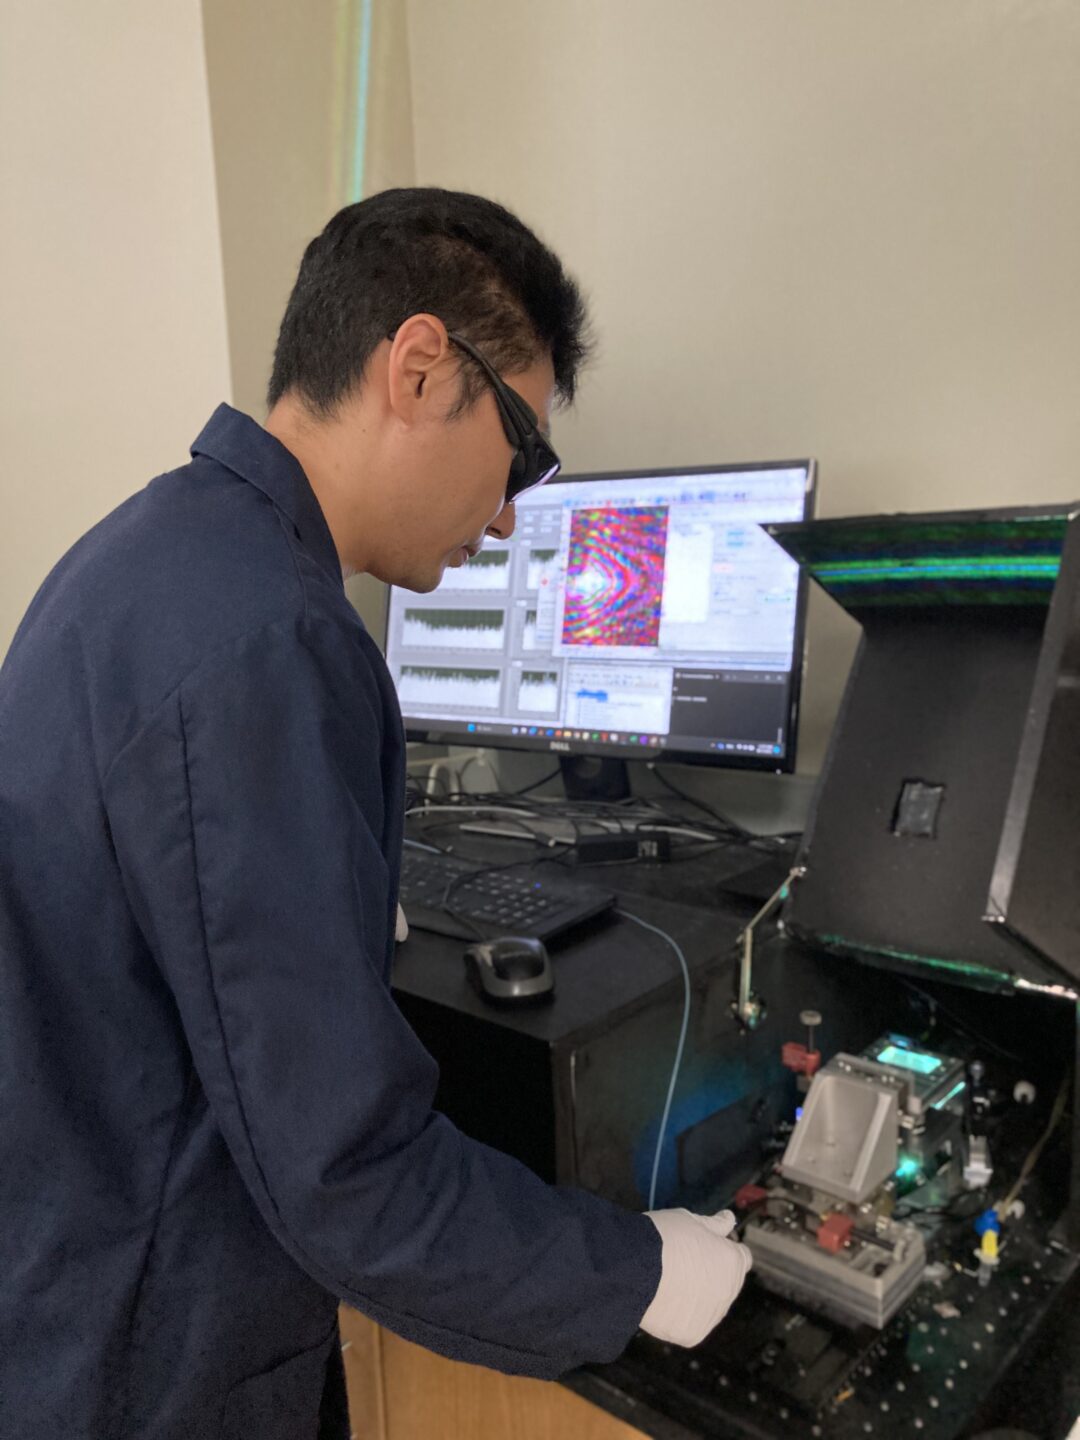 Li operating the device that peers inside LNPs to measure their mRNA payloads.